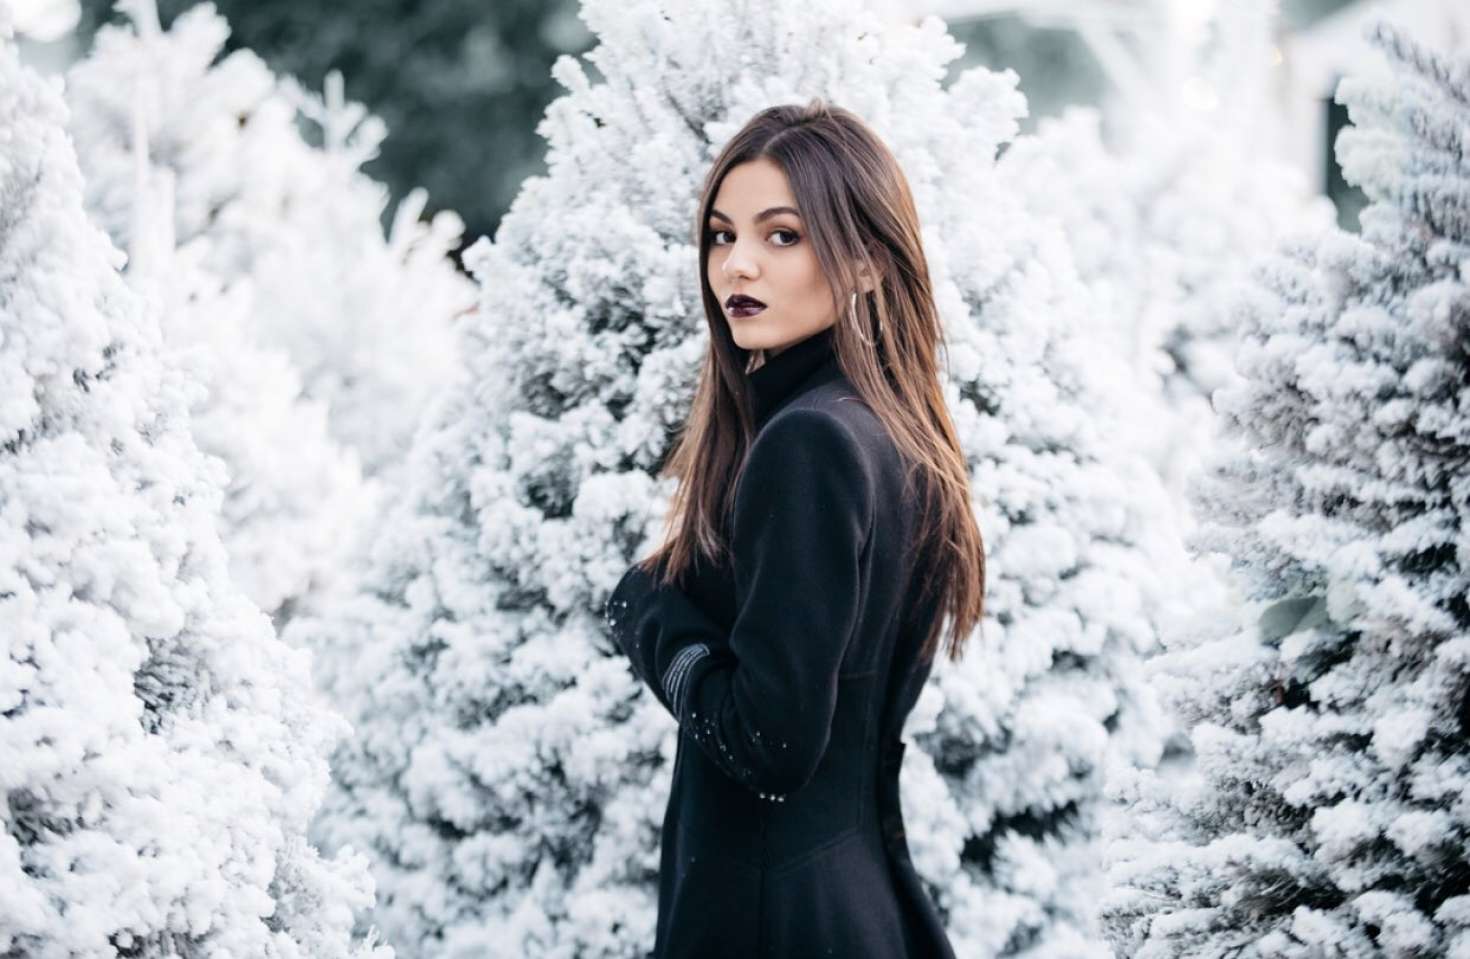 Victoria Justice 2017 : Victoria Justice - Fouad Jreige photoshoot in Los A...